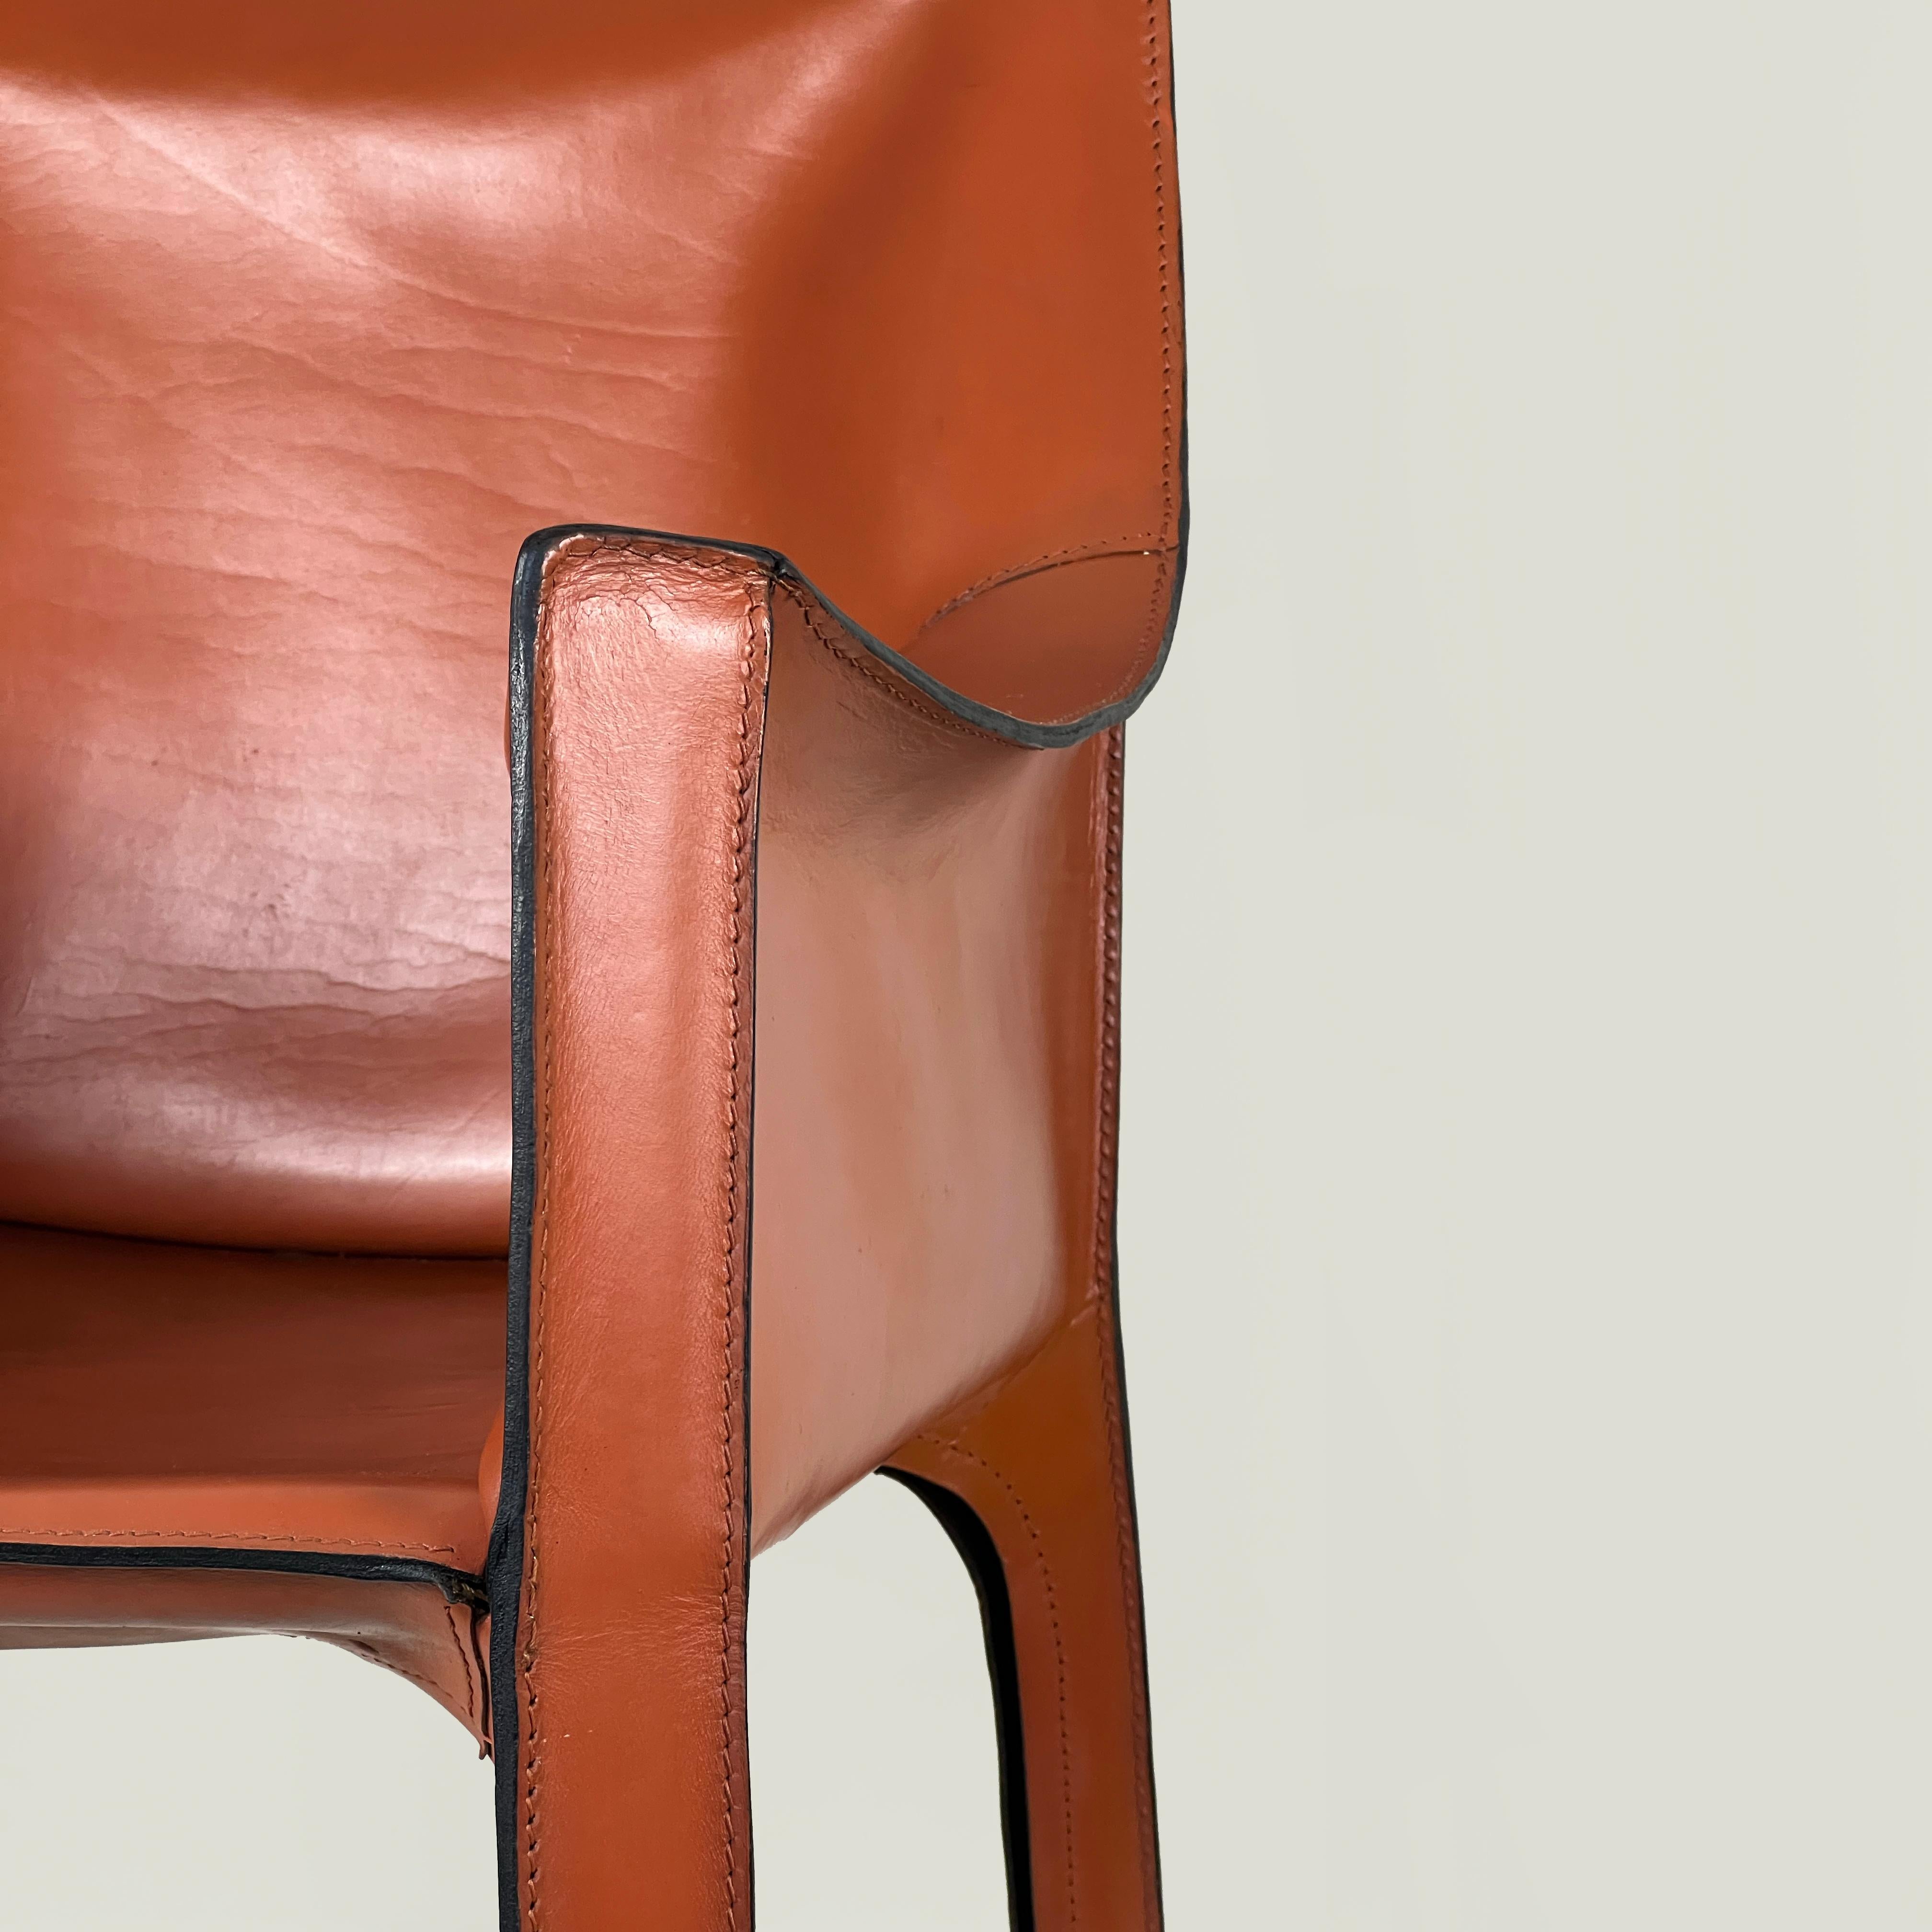 CAB 413 cognac leather armchair by Mario Bellini for Cassina, Italy 1970s

The Cab 413 chair represents the pioneering realization of the world's first chair with a self-supporting leather structure. The leather is fitted onto the metal frame,